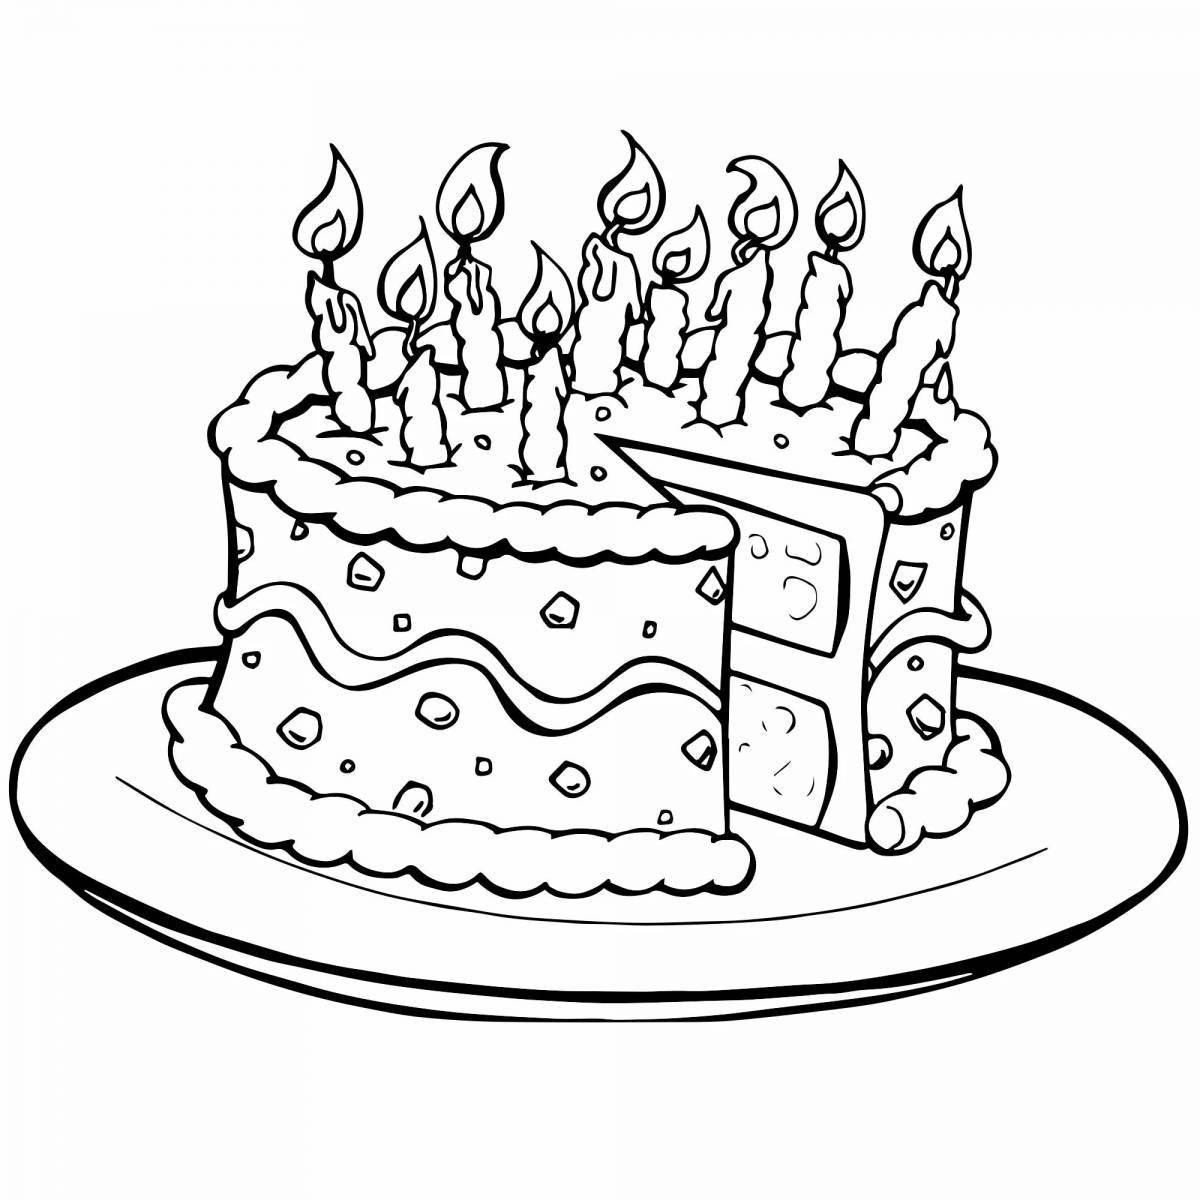 Decorative chocolate cake coloring page